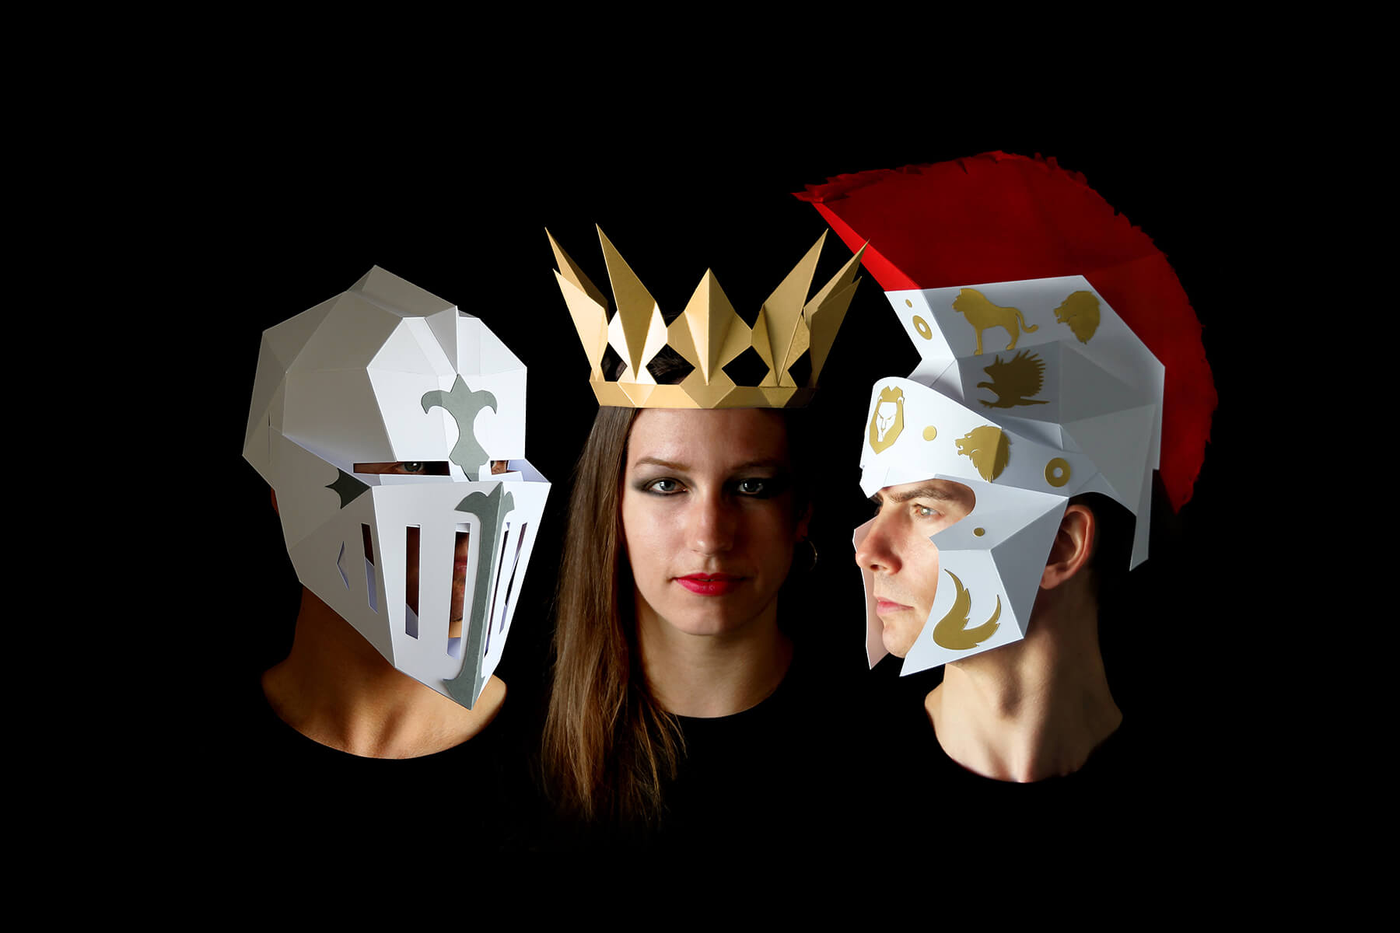 Papercraft Mask Templates designed by paper artist Kostas Ntanos. Knight and Spartan cardboard helmets. Make your own geometric paper masks by designer Kostas Ntanos. Download DIY papercraft mask templates. Halloween paper masks to make yourself. 